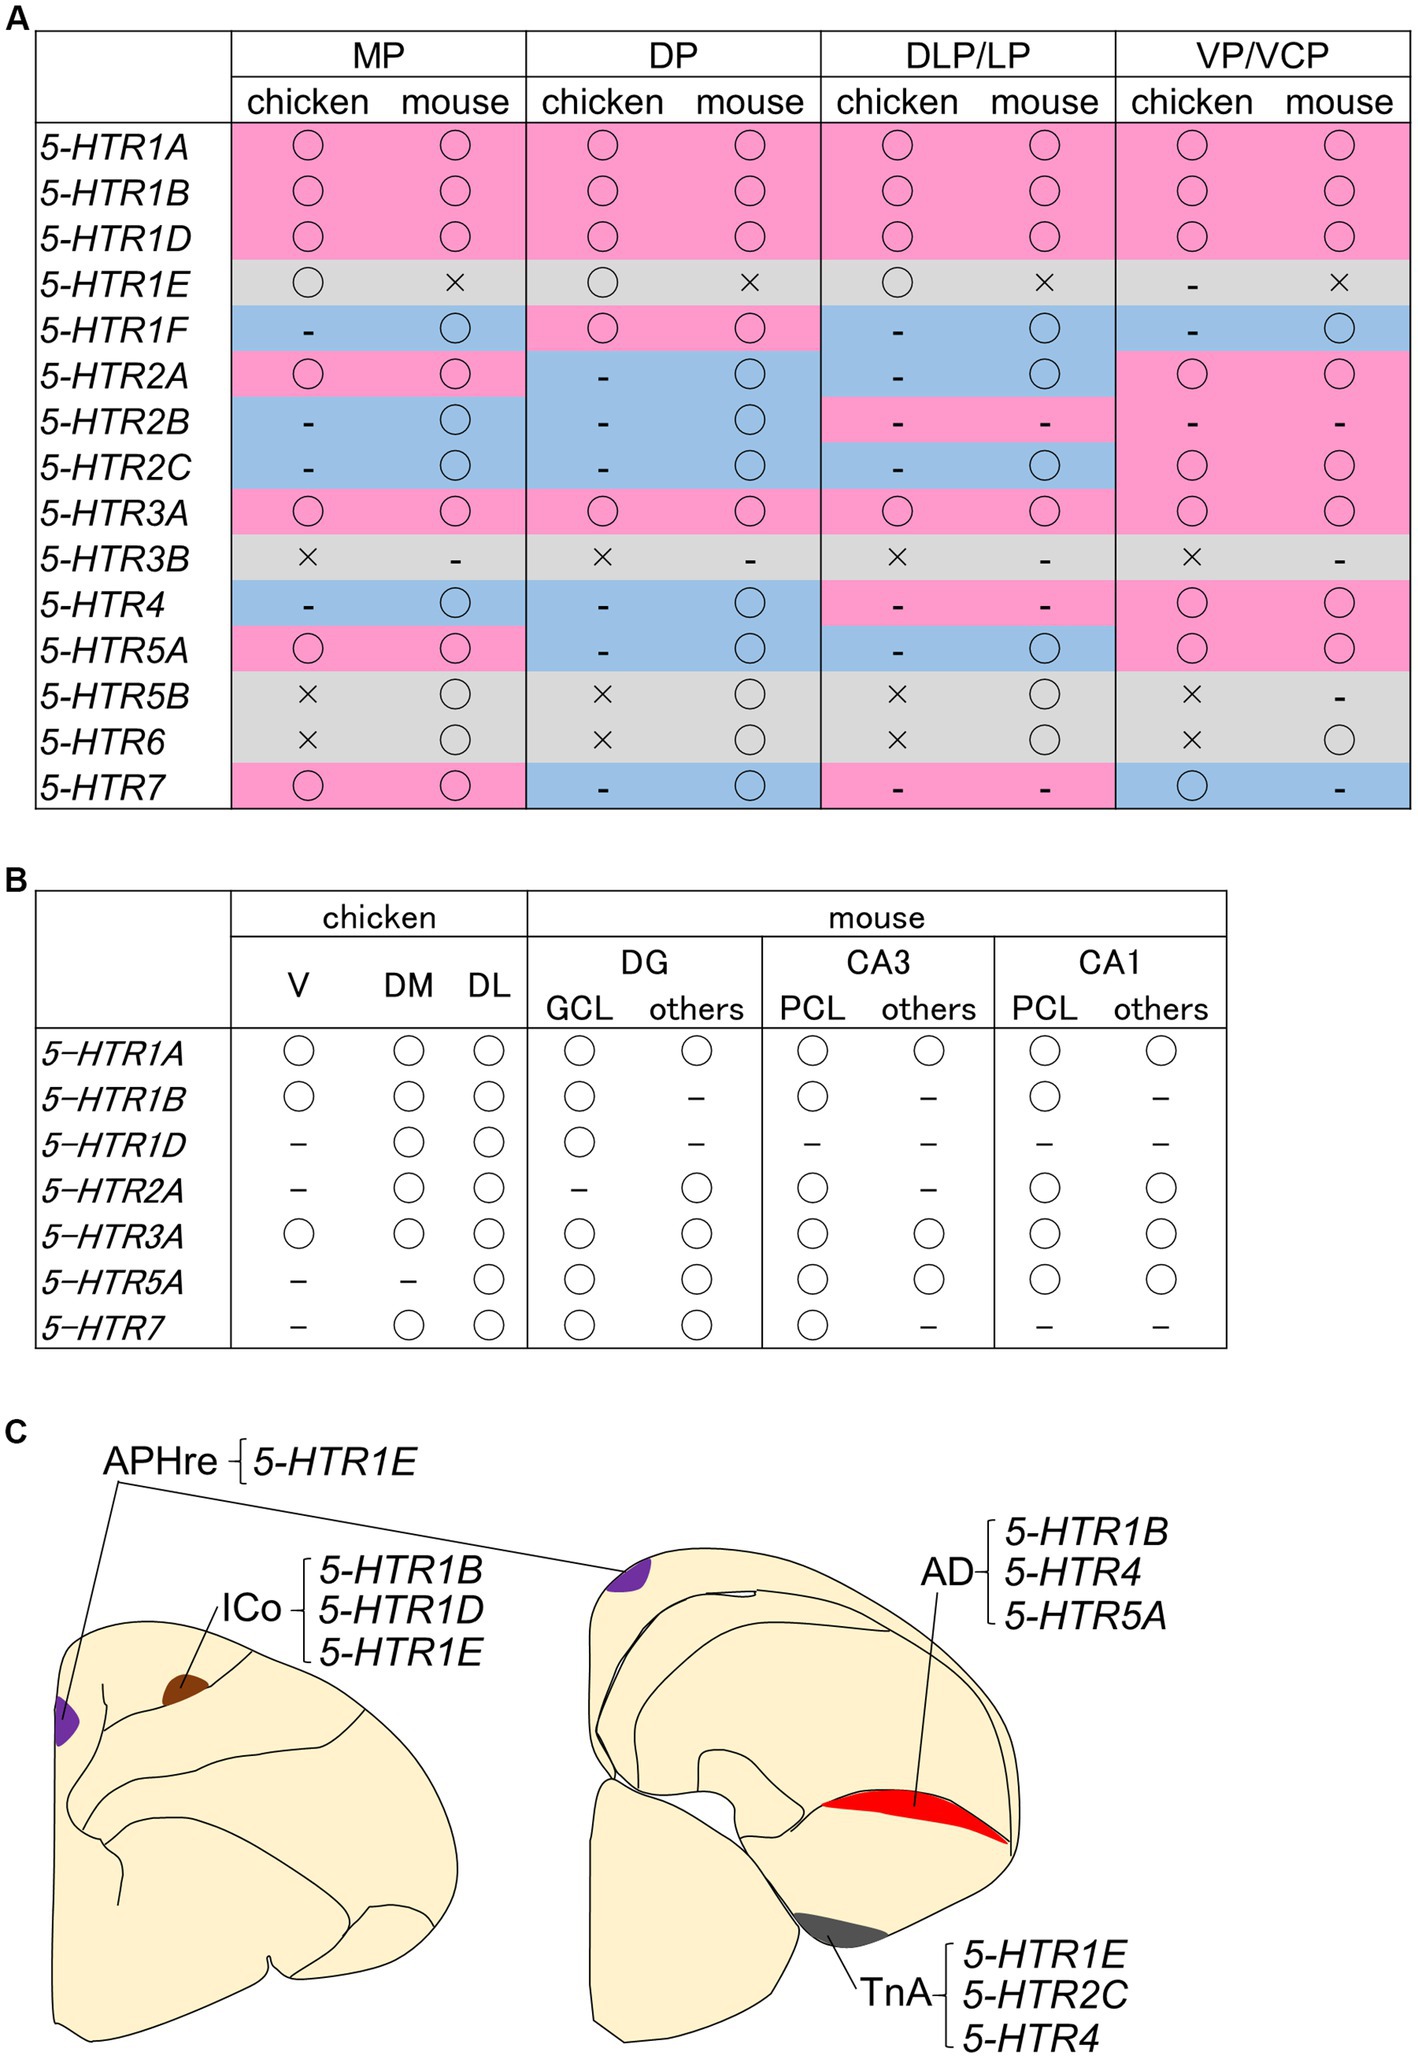 Frontiers | Molecular biology of serotonergic systems in avian brains